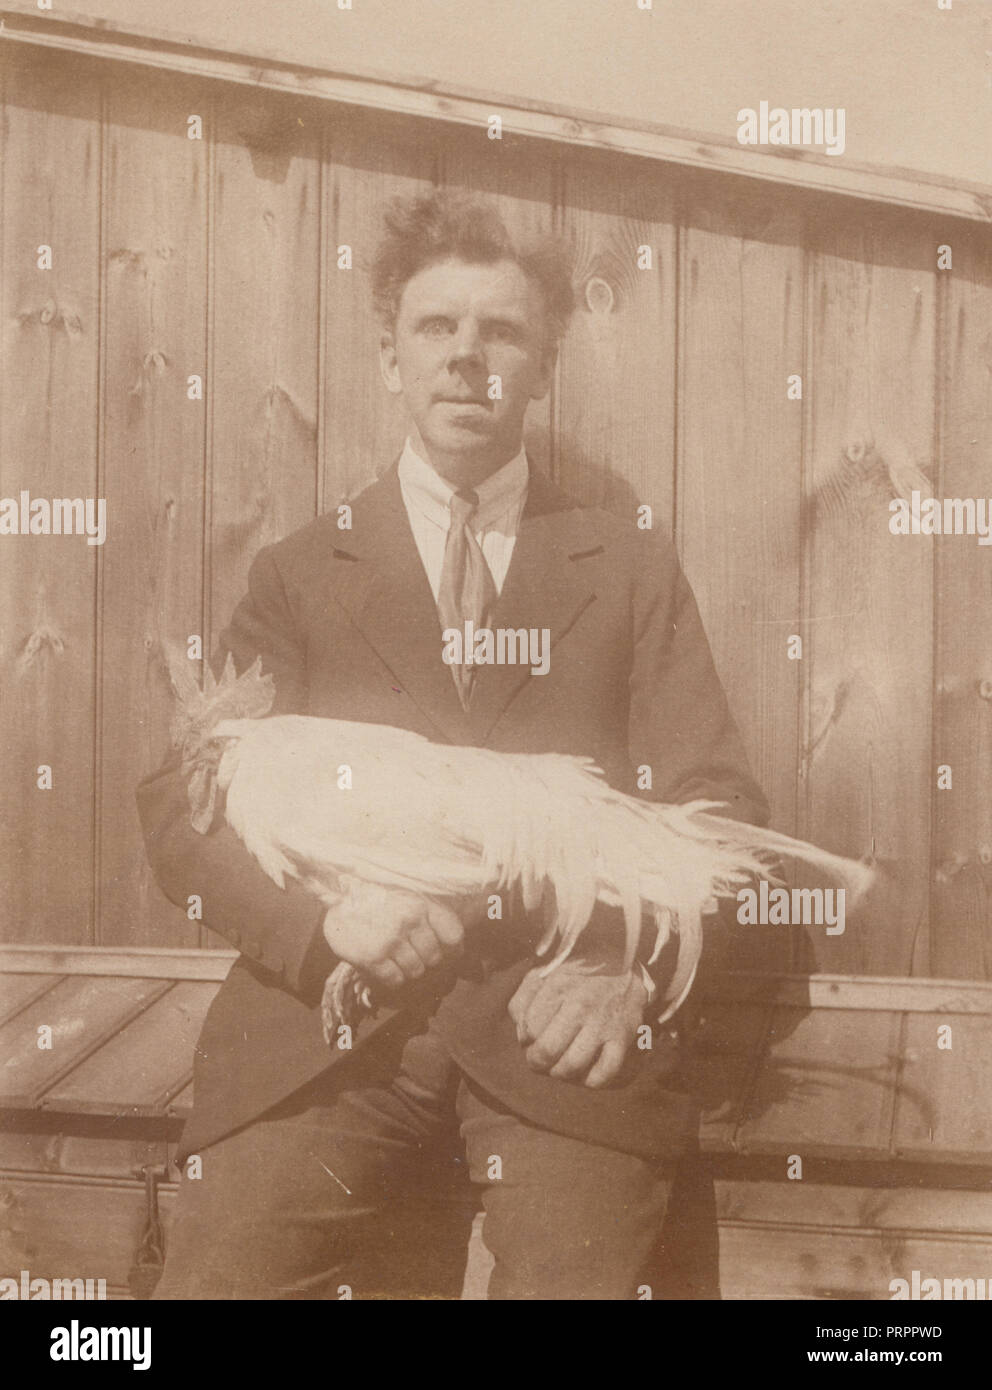 * Vintage Photograph of a Man With Scruffy Hair Holding a Cockerel or Rooster. Stock Photo